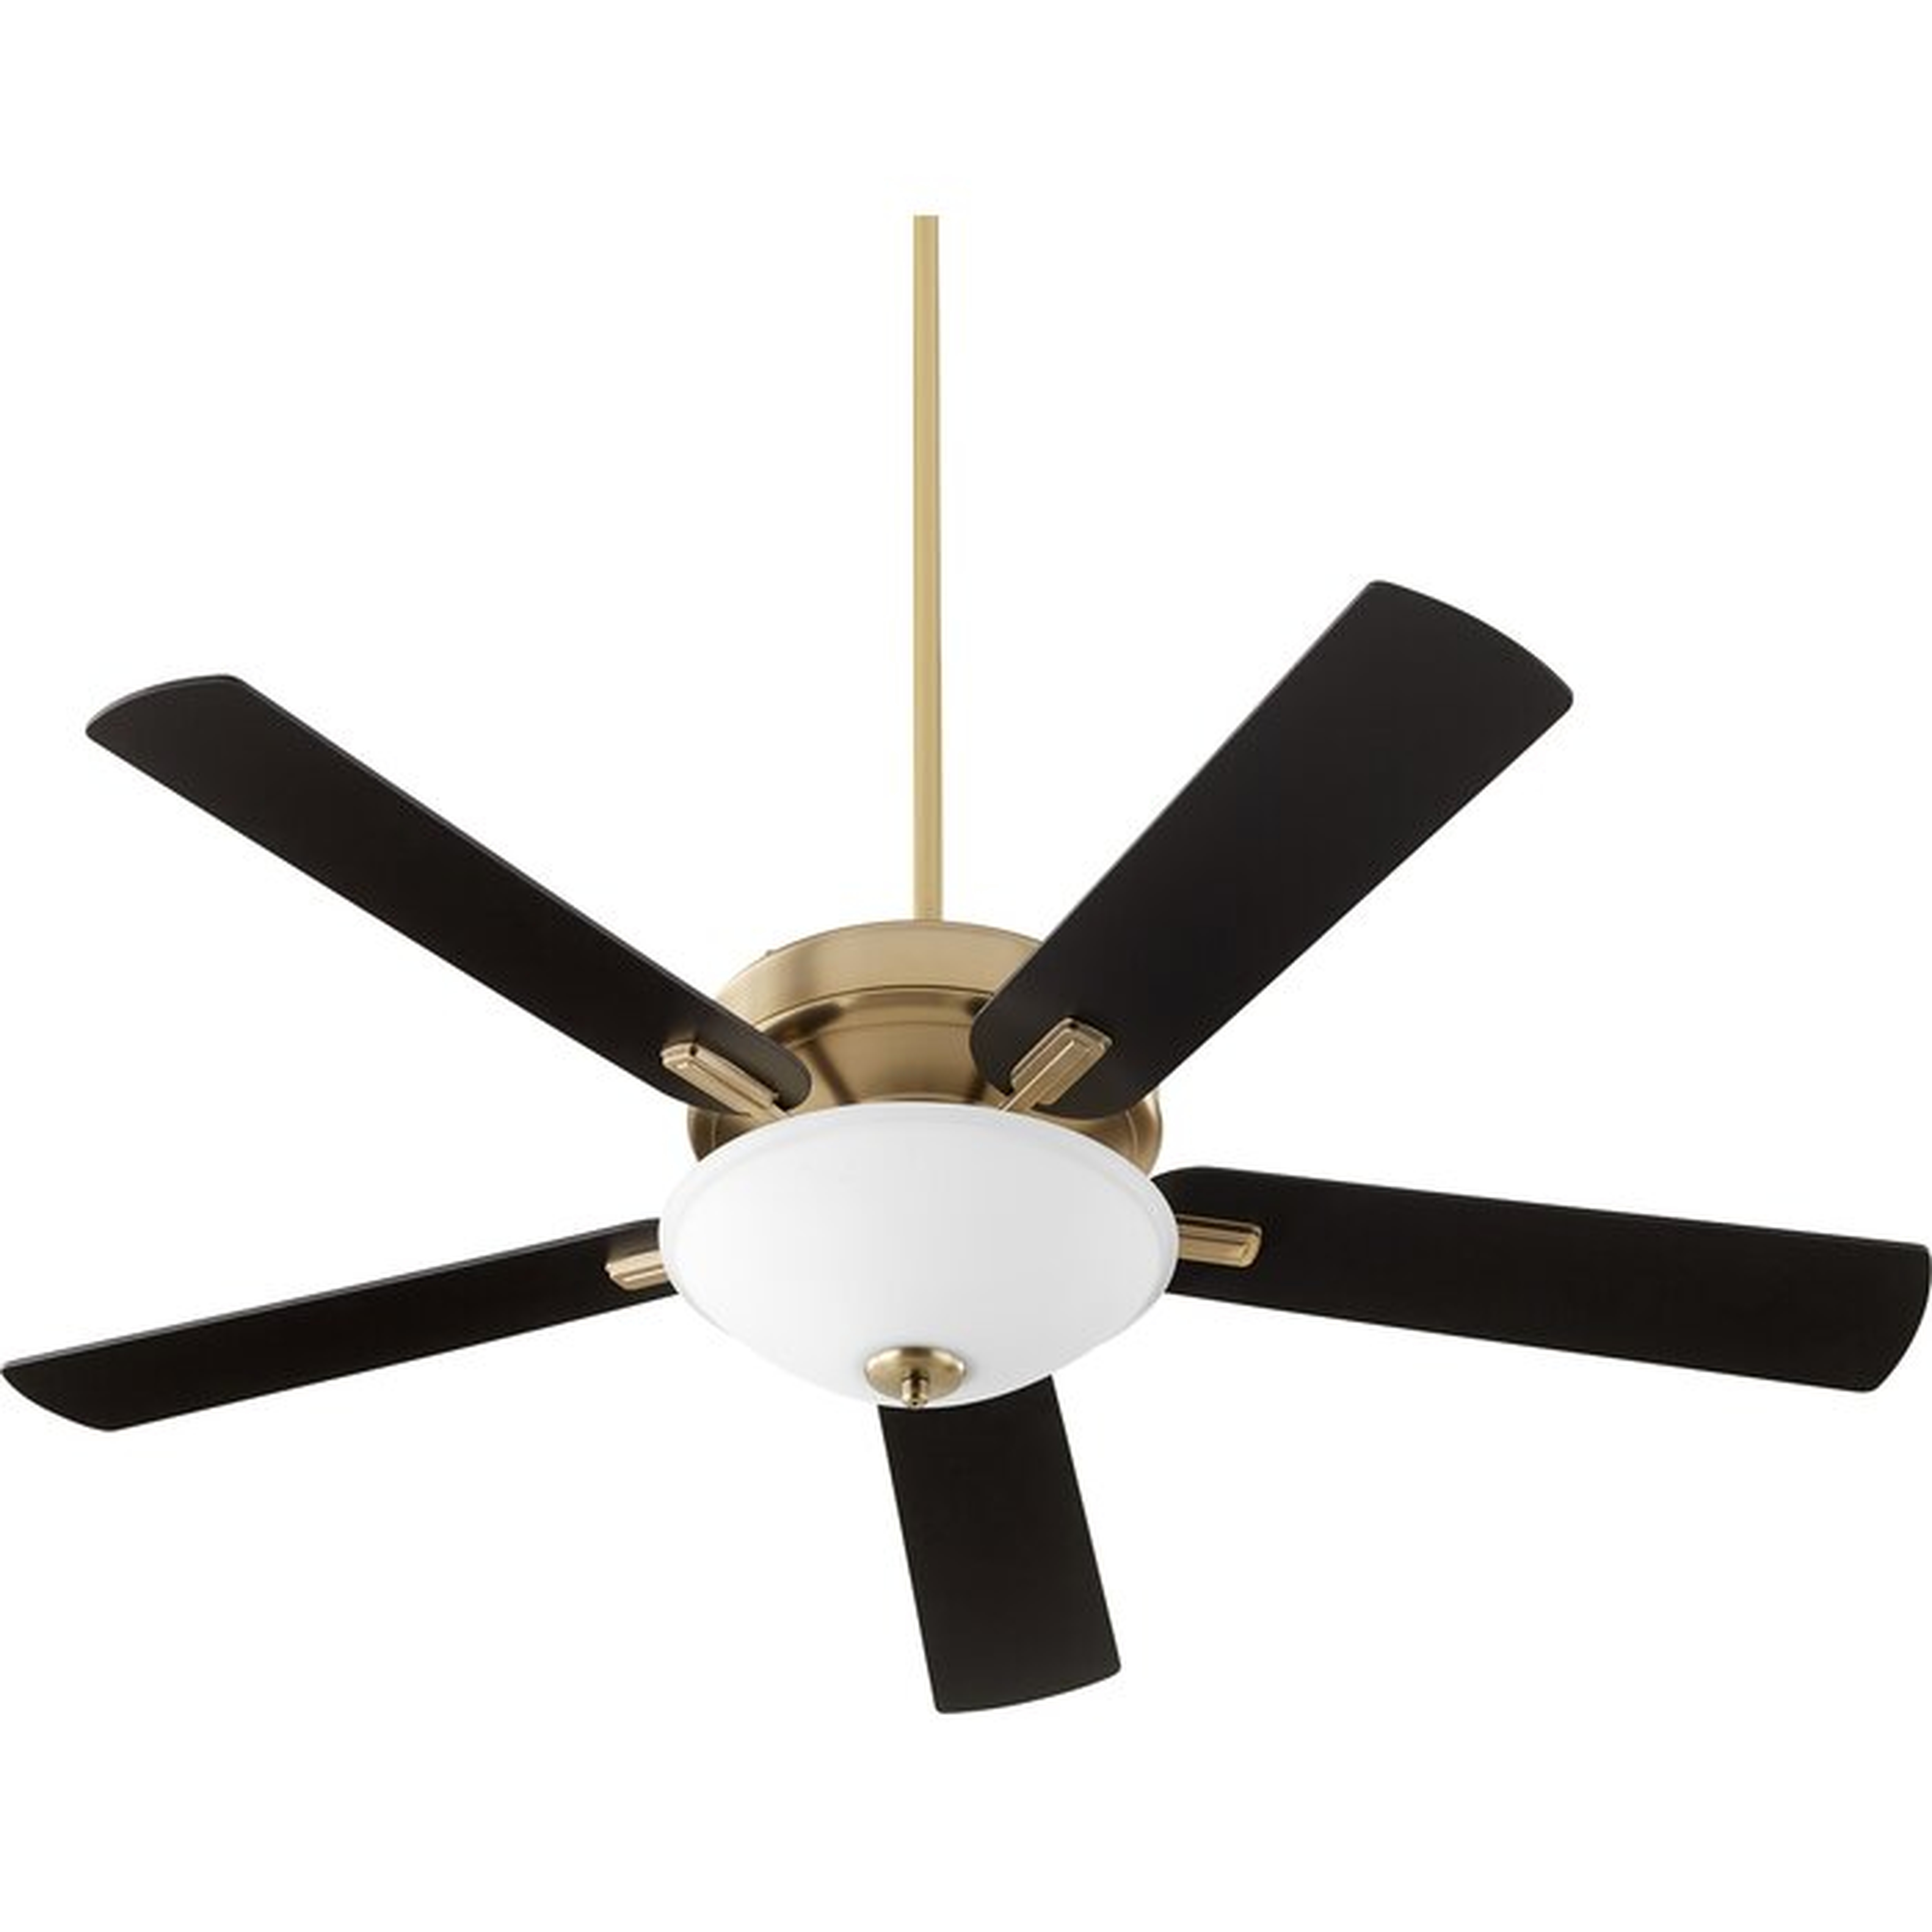 52" Byrnes Ceiling Fan with Light Kit Included - Wayfair